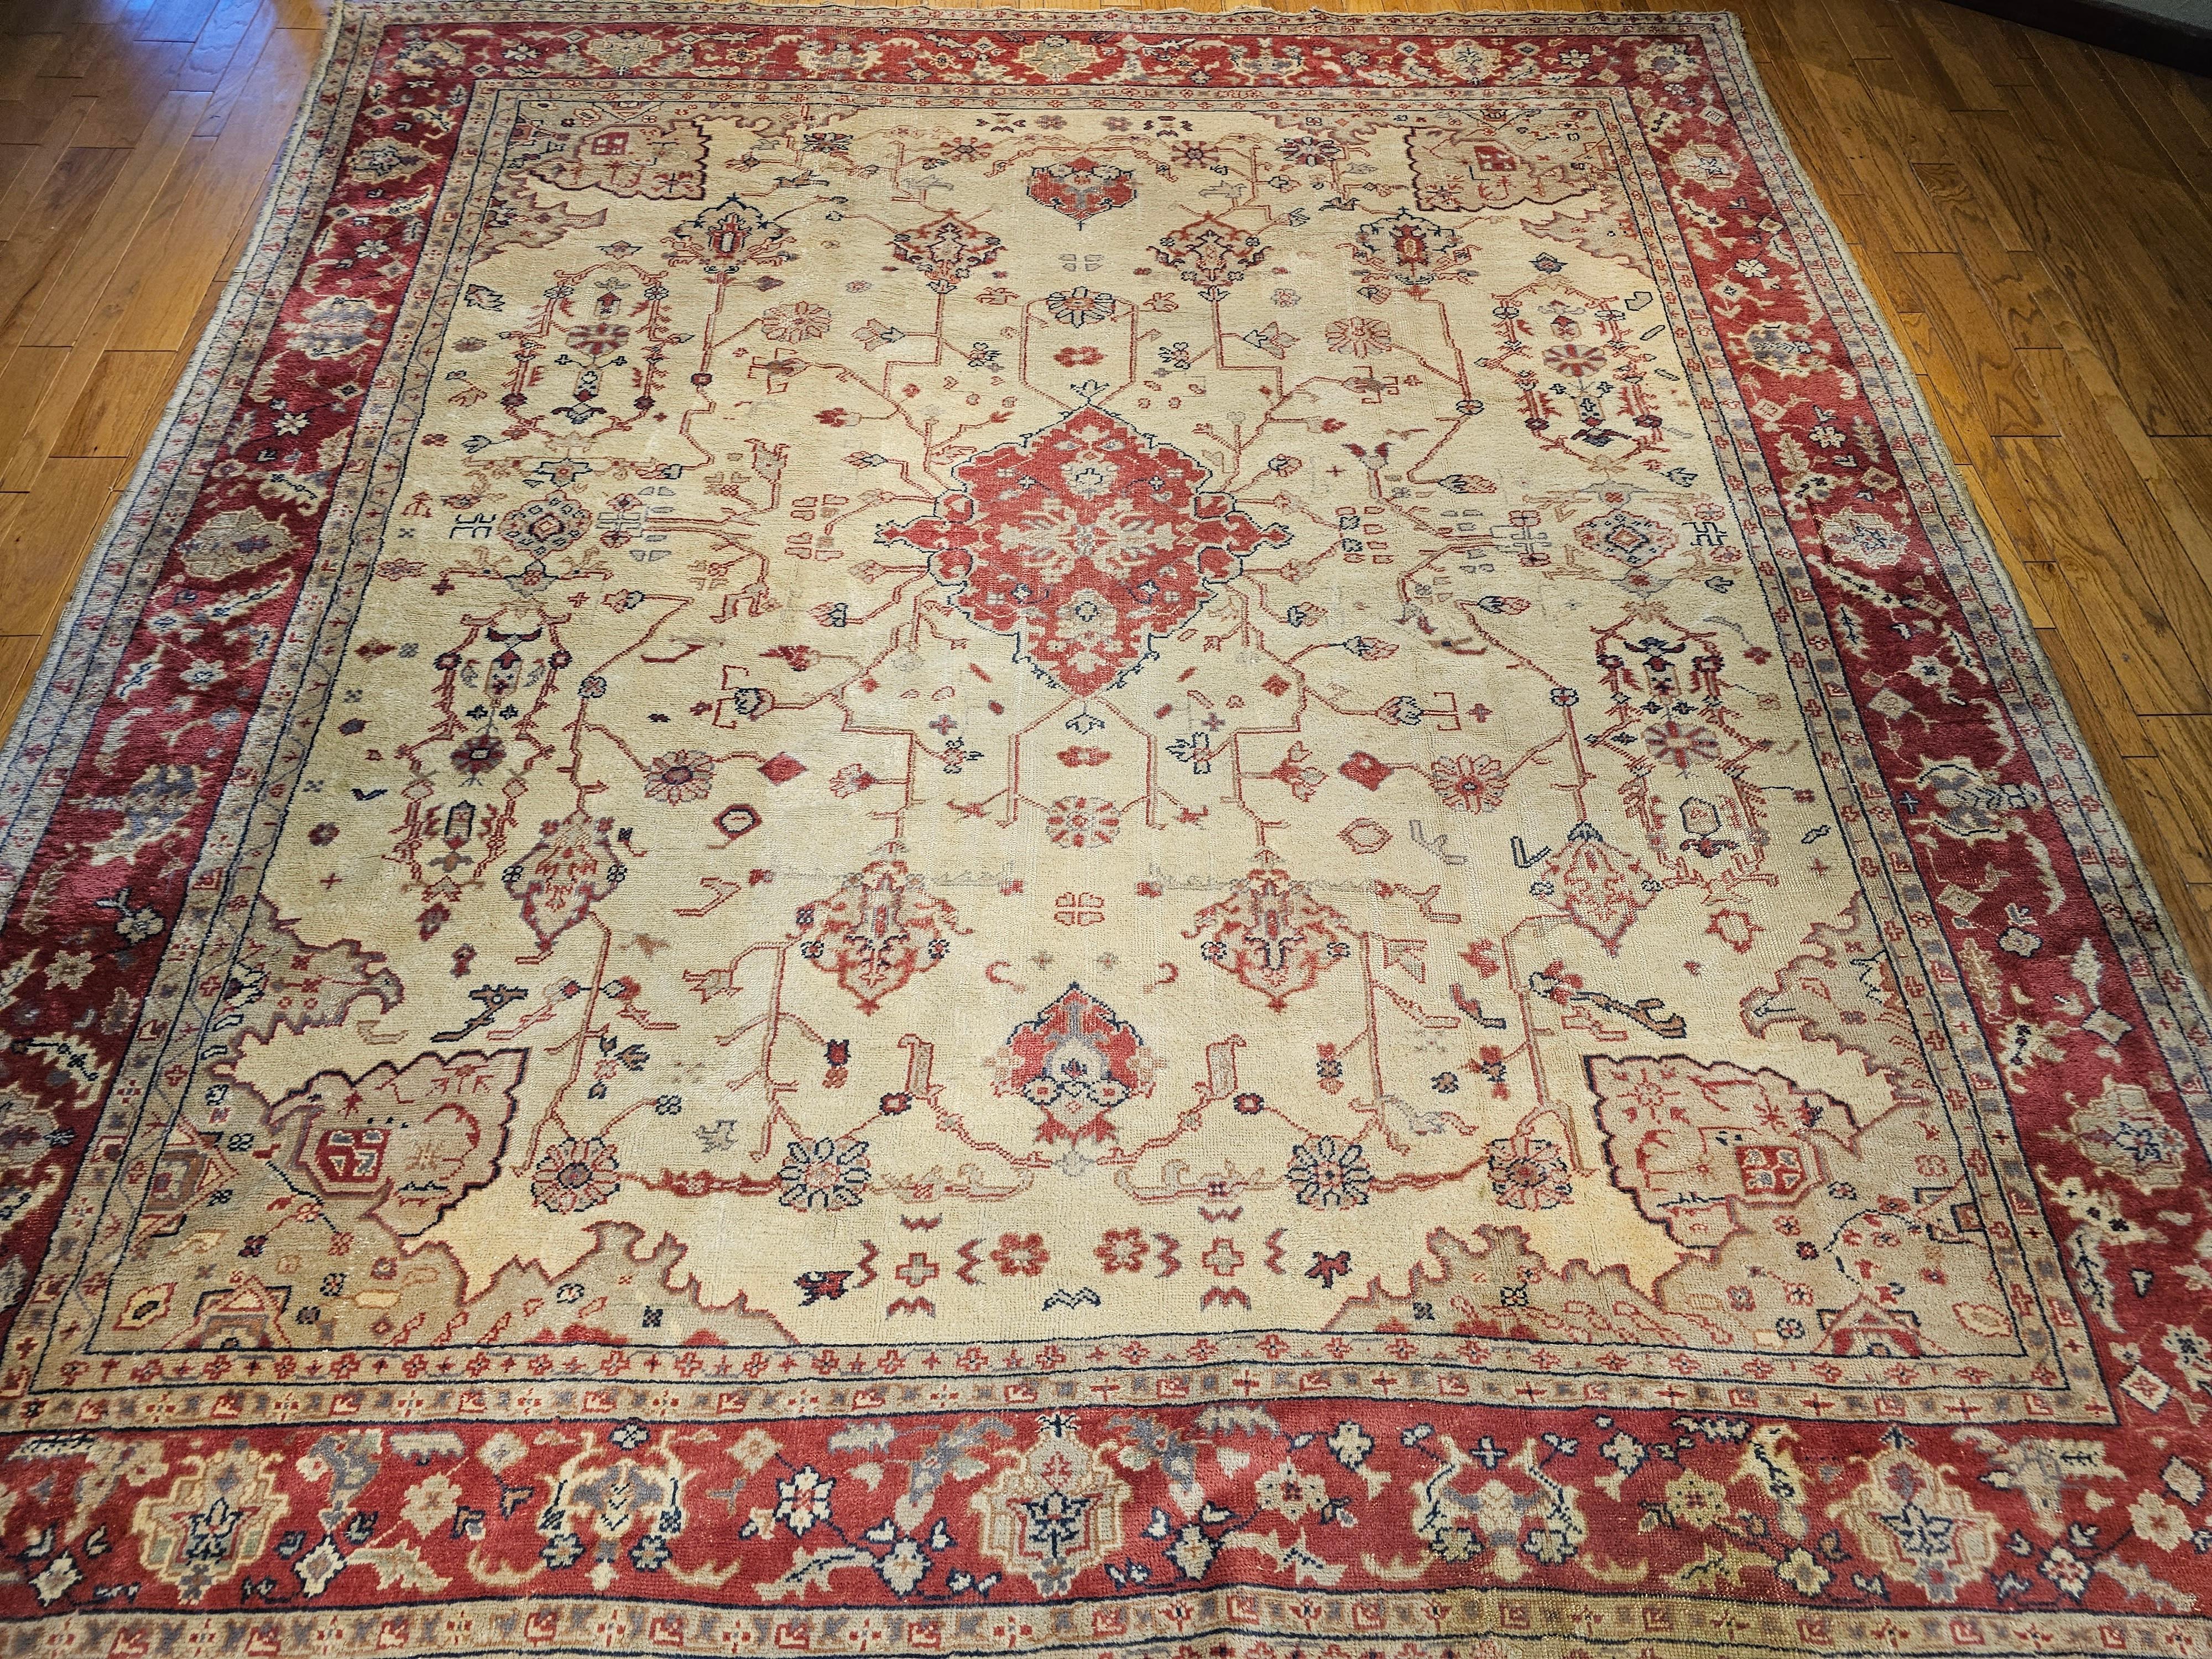 Extremely rare and very desirable Square oversized Turkish Oushak from the early 1900s in soft shades of cream, red, pink, green, and pale yellow colors.  The Oushak rug is in the style of the Persian Serapi rugs from the mid-1800s.  It has an open